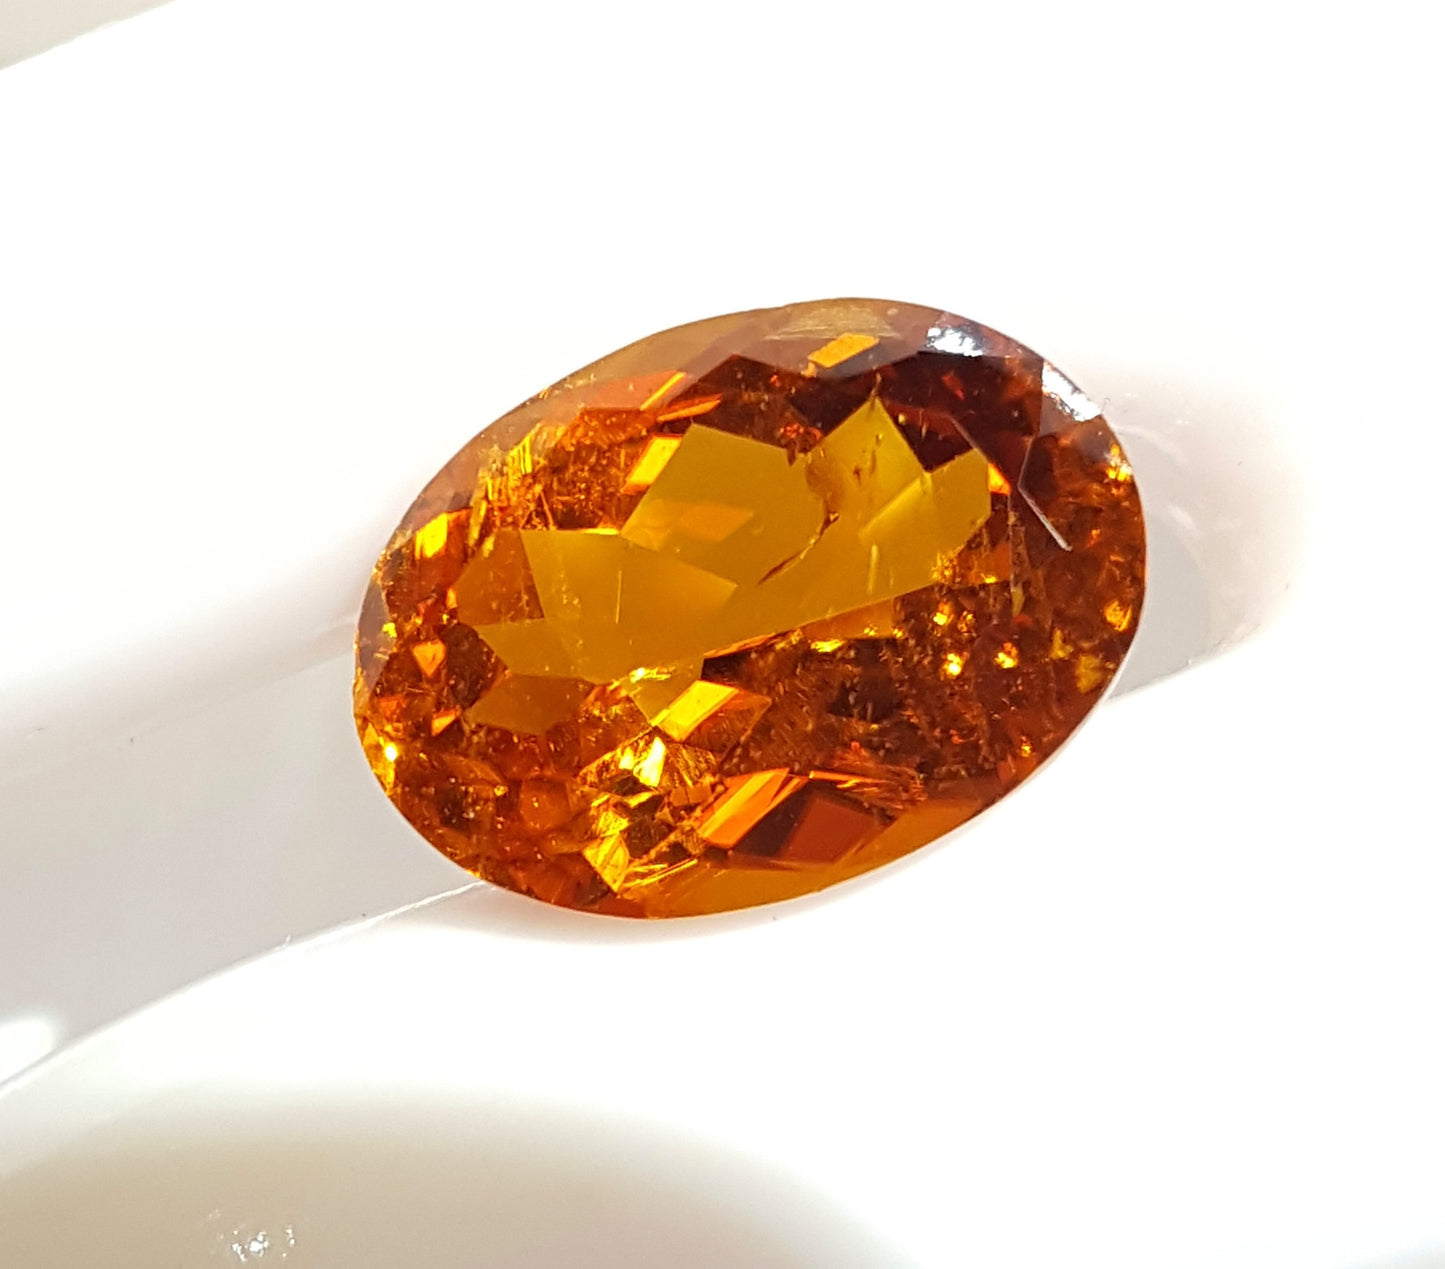 Rare Large 11.5 Carat Natural Clinohumite Oval Cut Collector's Gem Stone